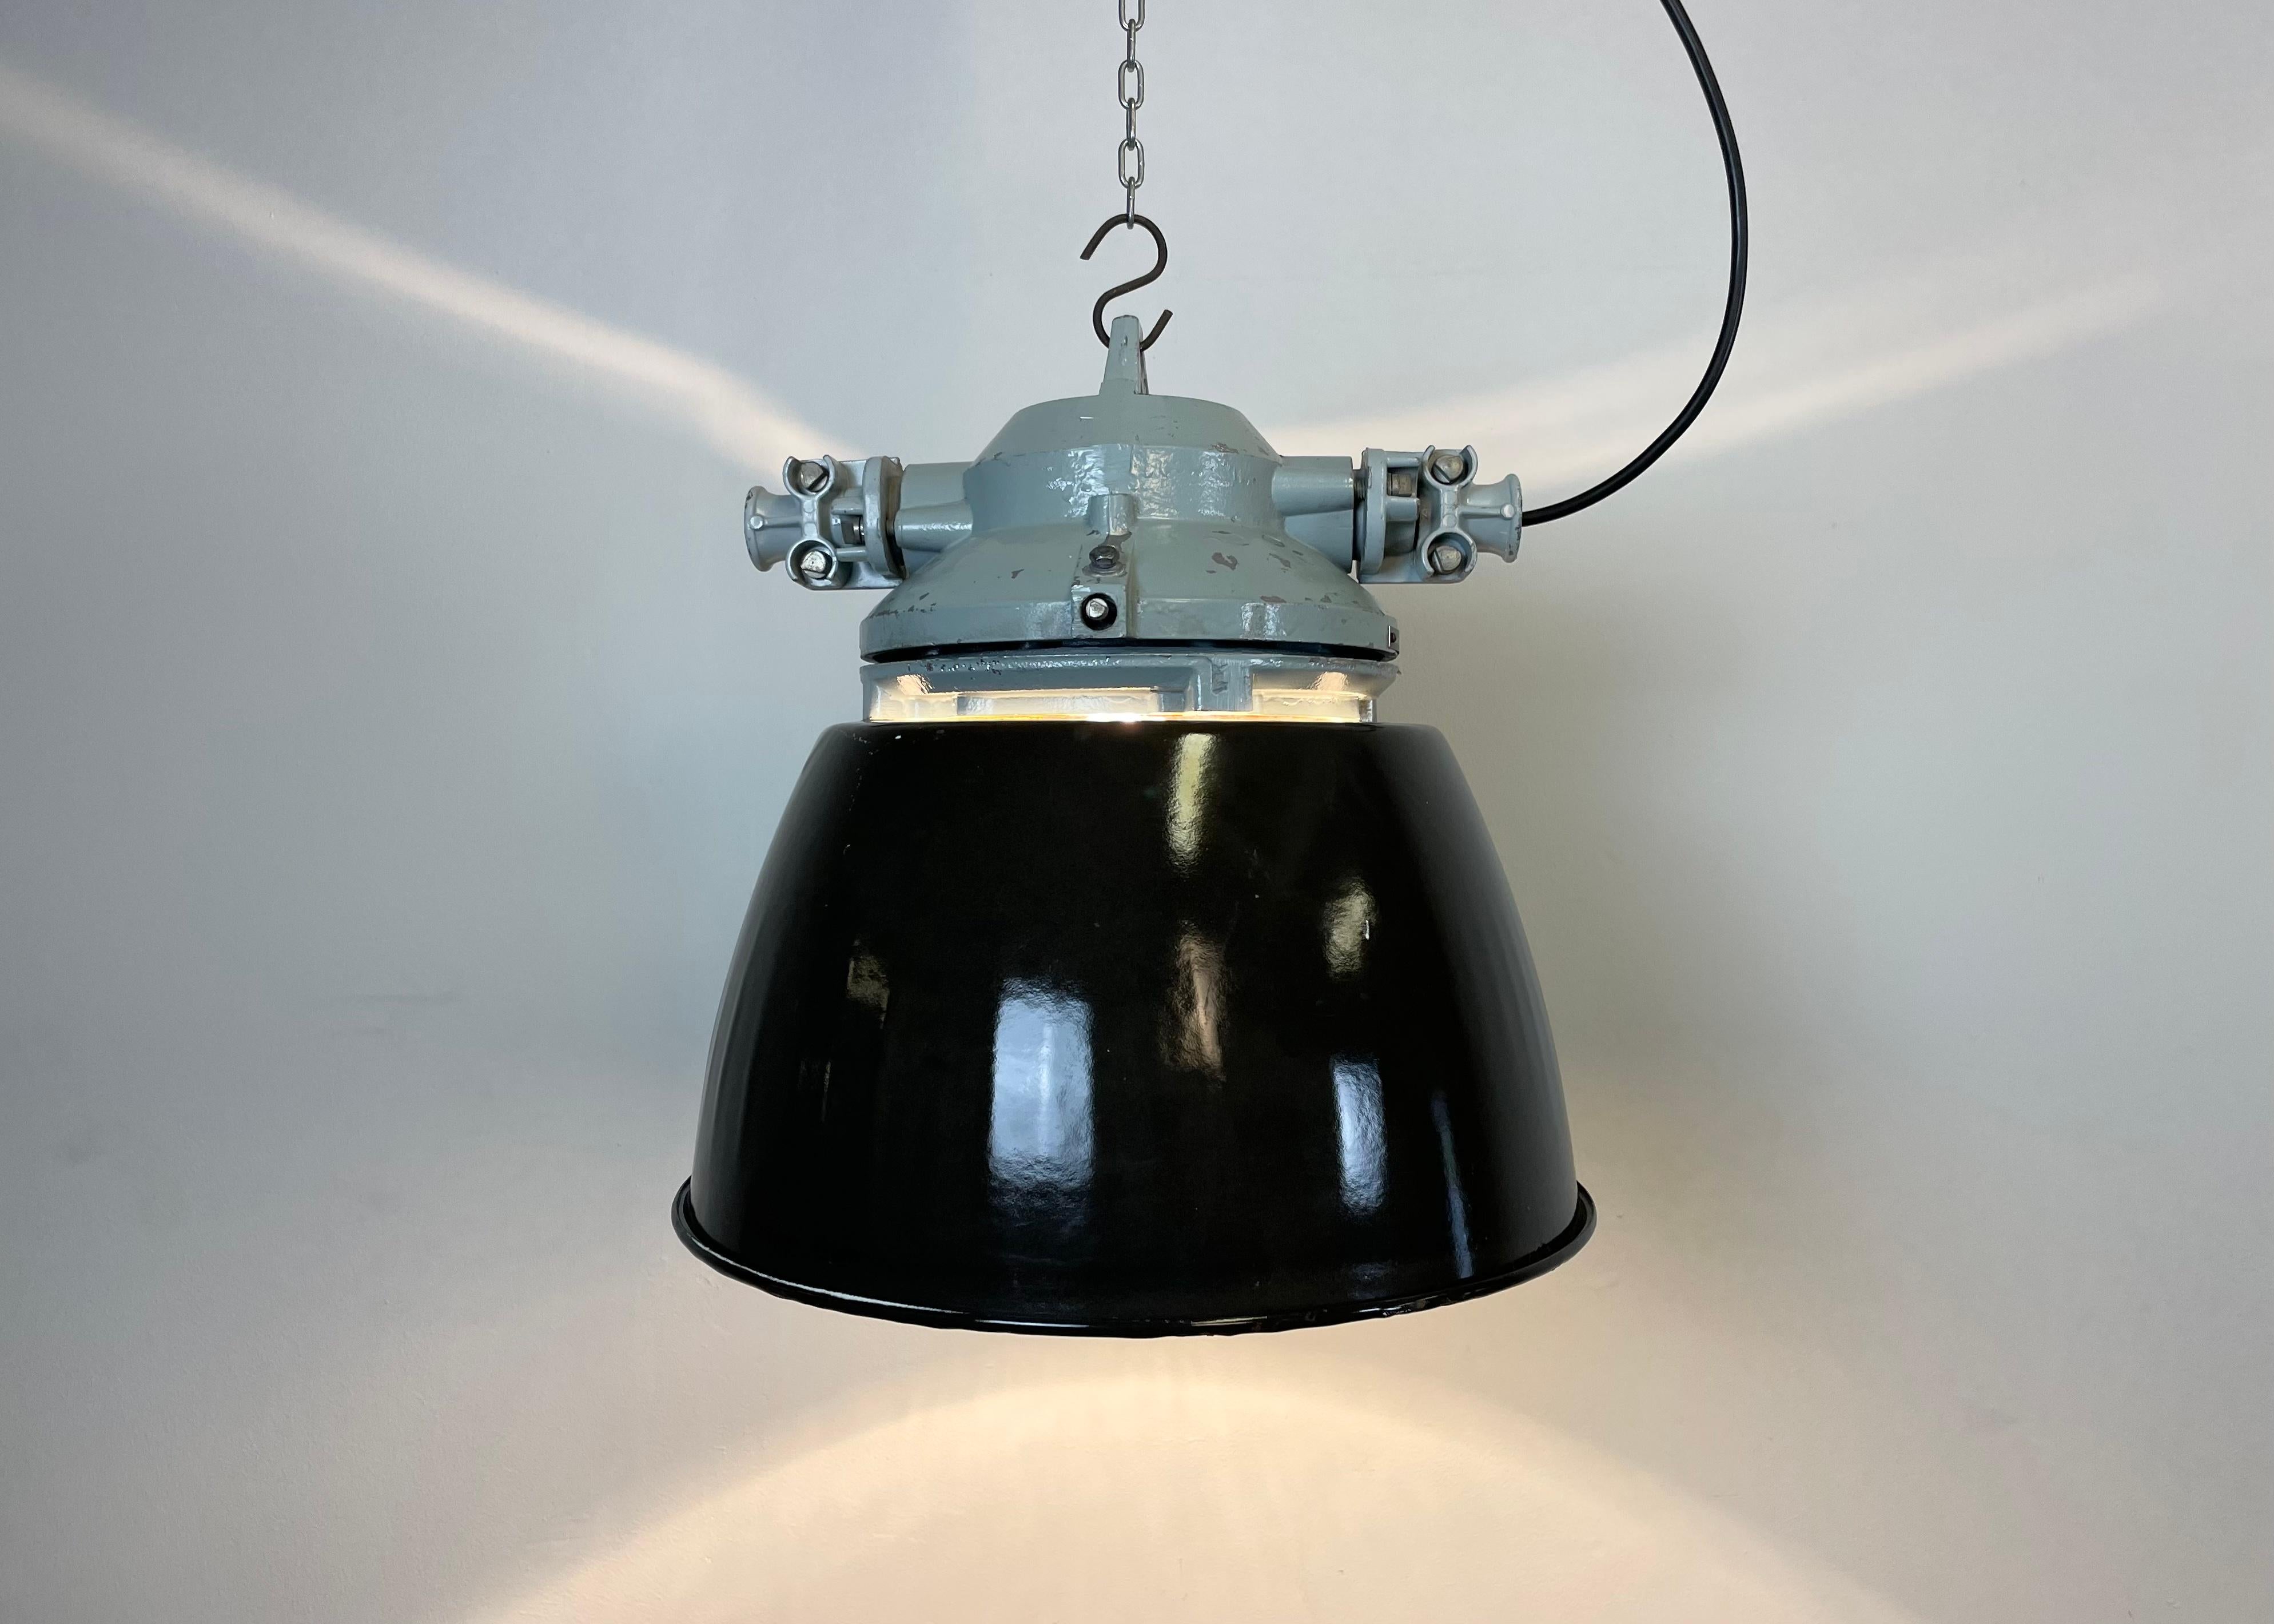 Grey Explosion Proof Lamp with Black Enameled Shade, 1970s For Sale 2